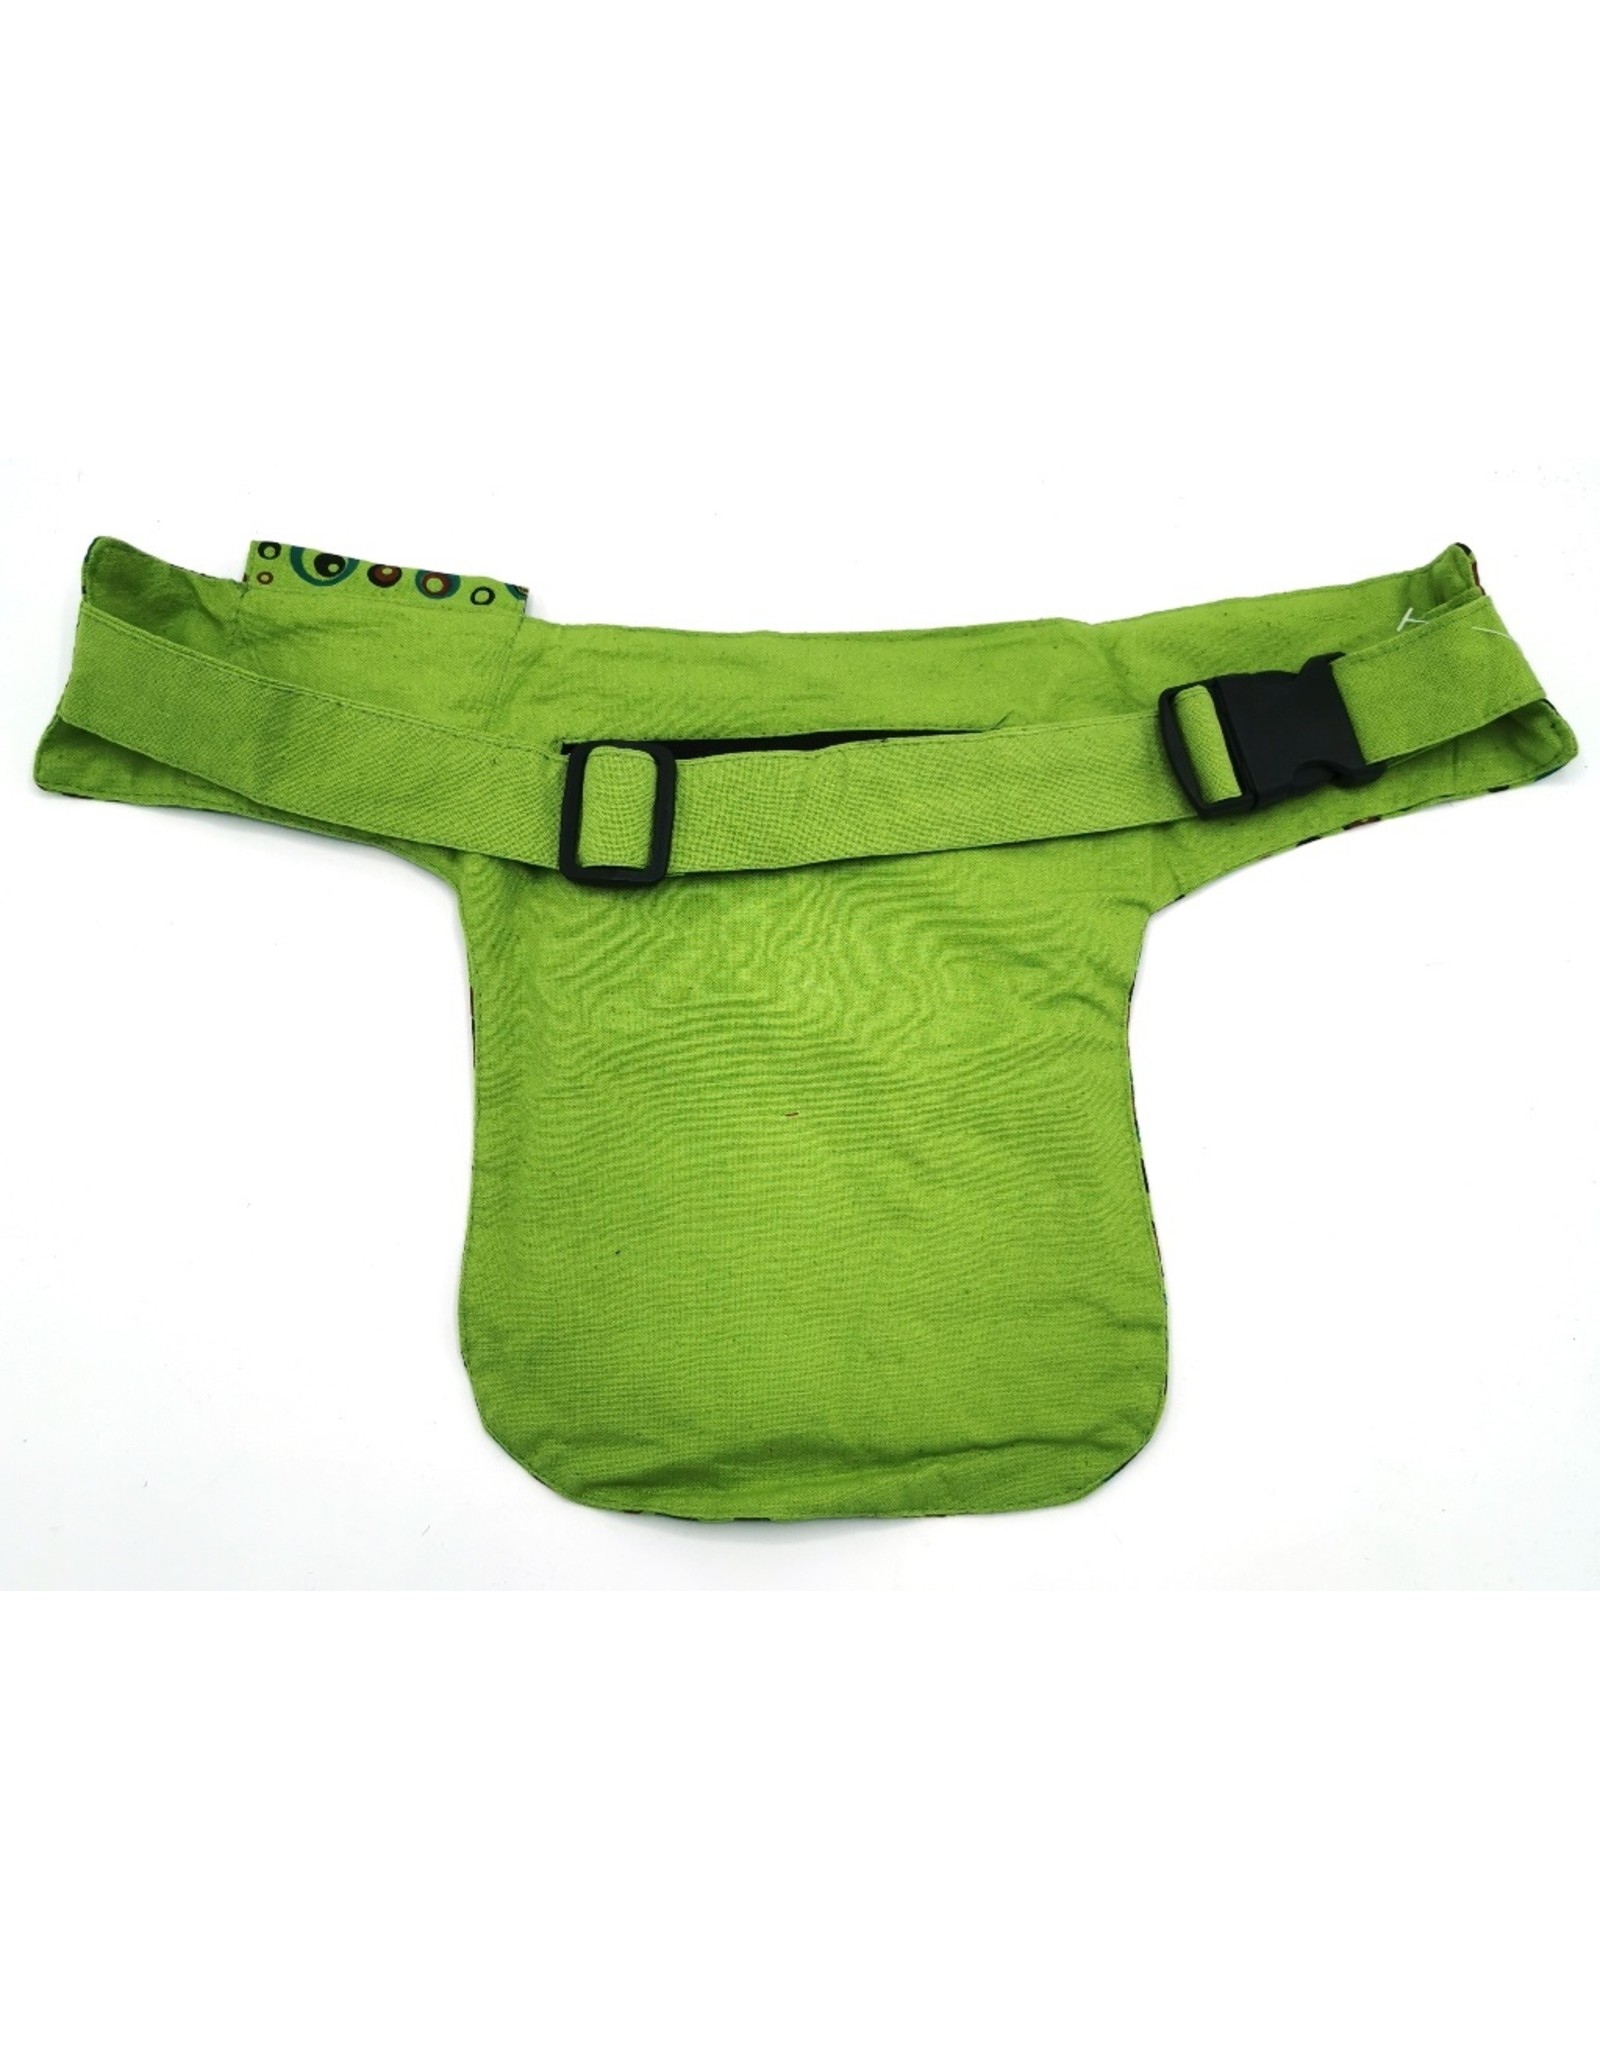 ONK Fashion bags - Fanny Pack Fantasy in Colorful Cotton  Green